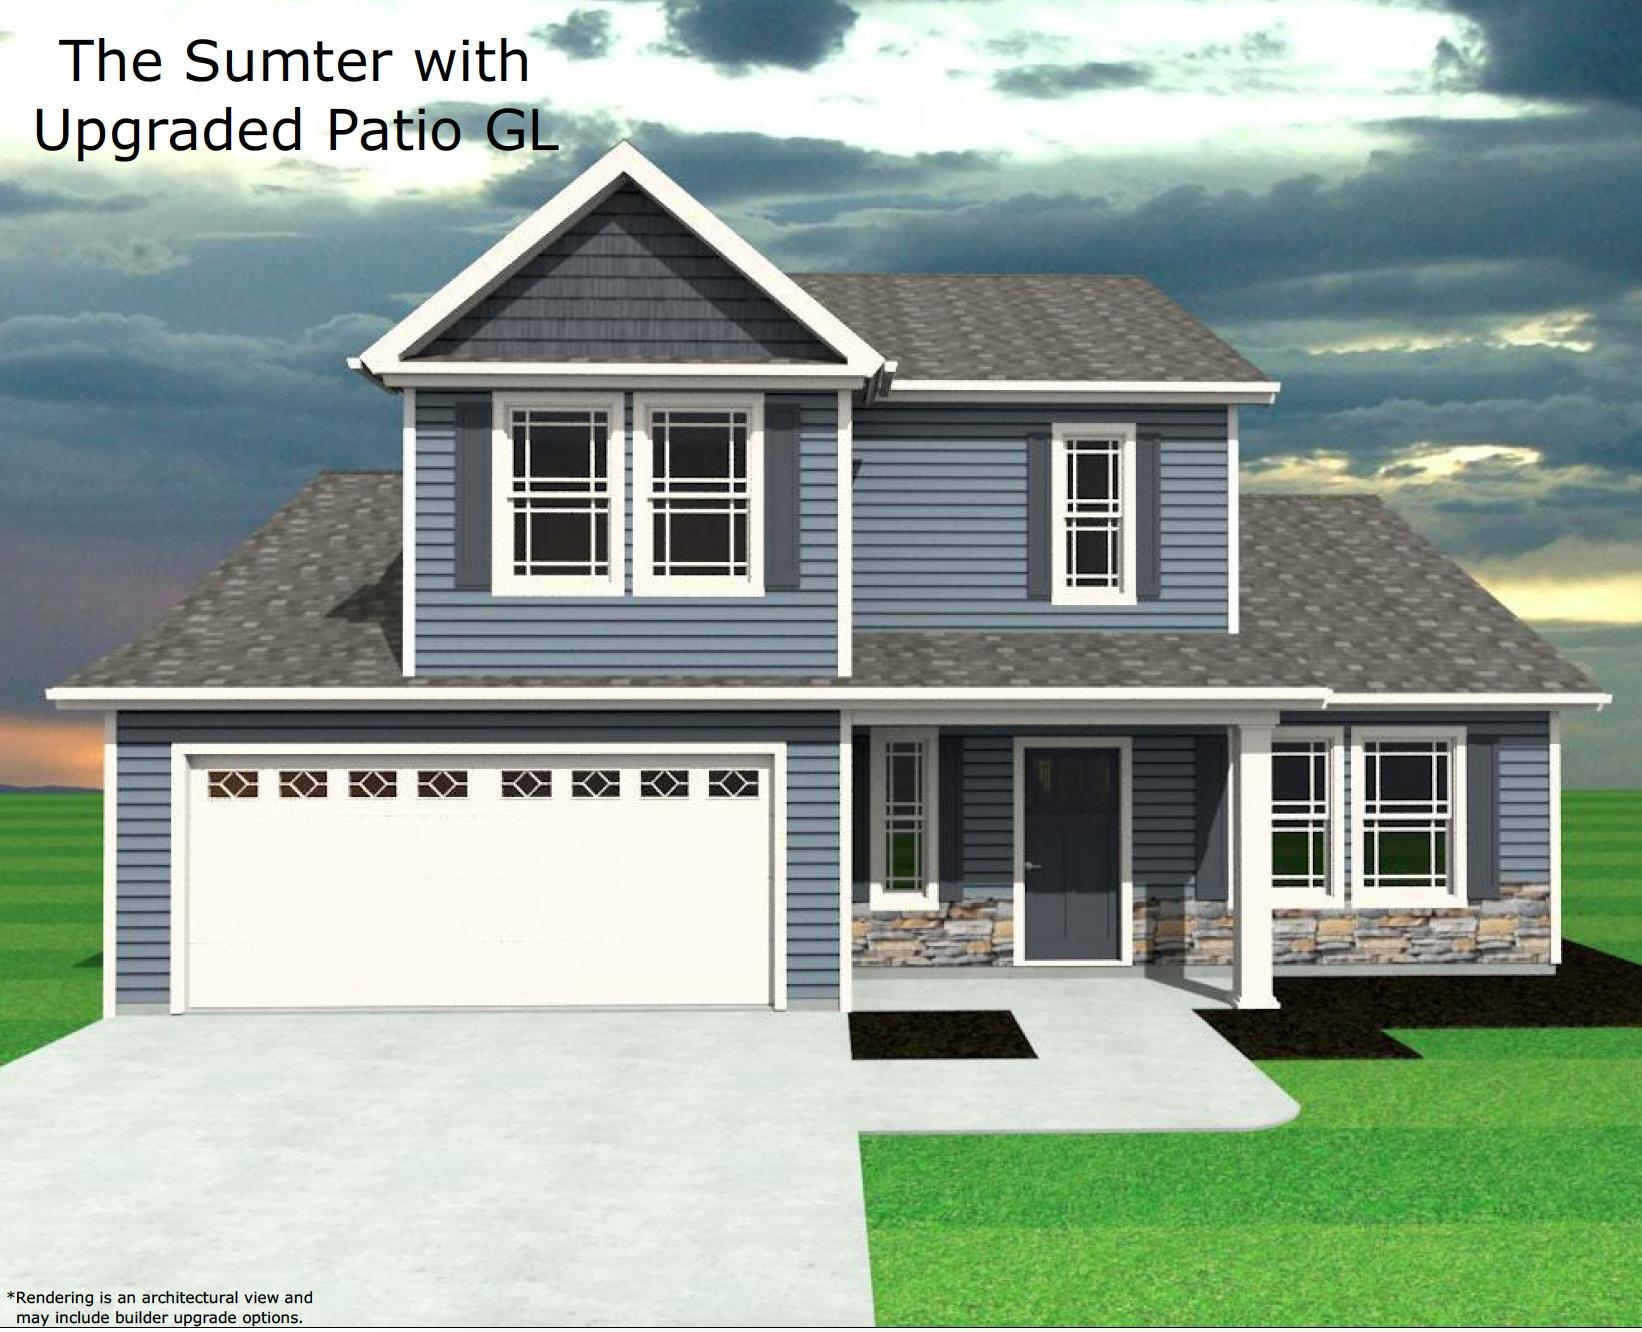 The SUMTER plan is a 2 story home with the master on the main level and 3 additional bedrooms upstairs. The large open living area features LVP flooring, a gas log fireplace, and the kitchen includes granite countertops. Crown molding with rope lighting, chair rail, and other. included features make the home stand out. Out back is a large covered porch overlooking the huge yard. Closing costs/interest rate incentives are available when using preferred lender and attorney.